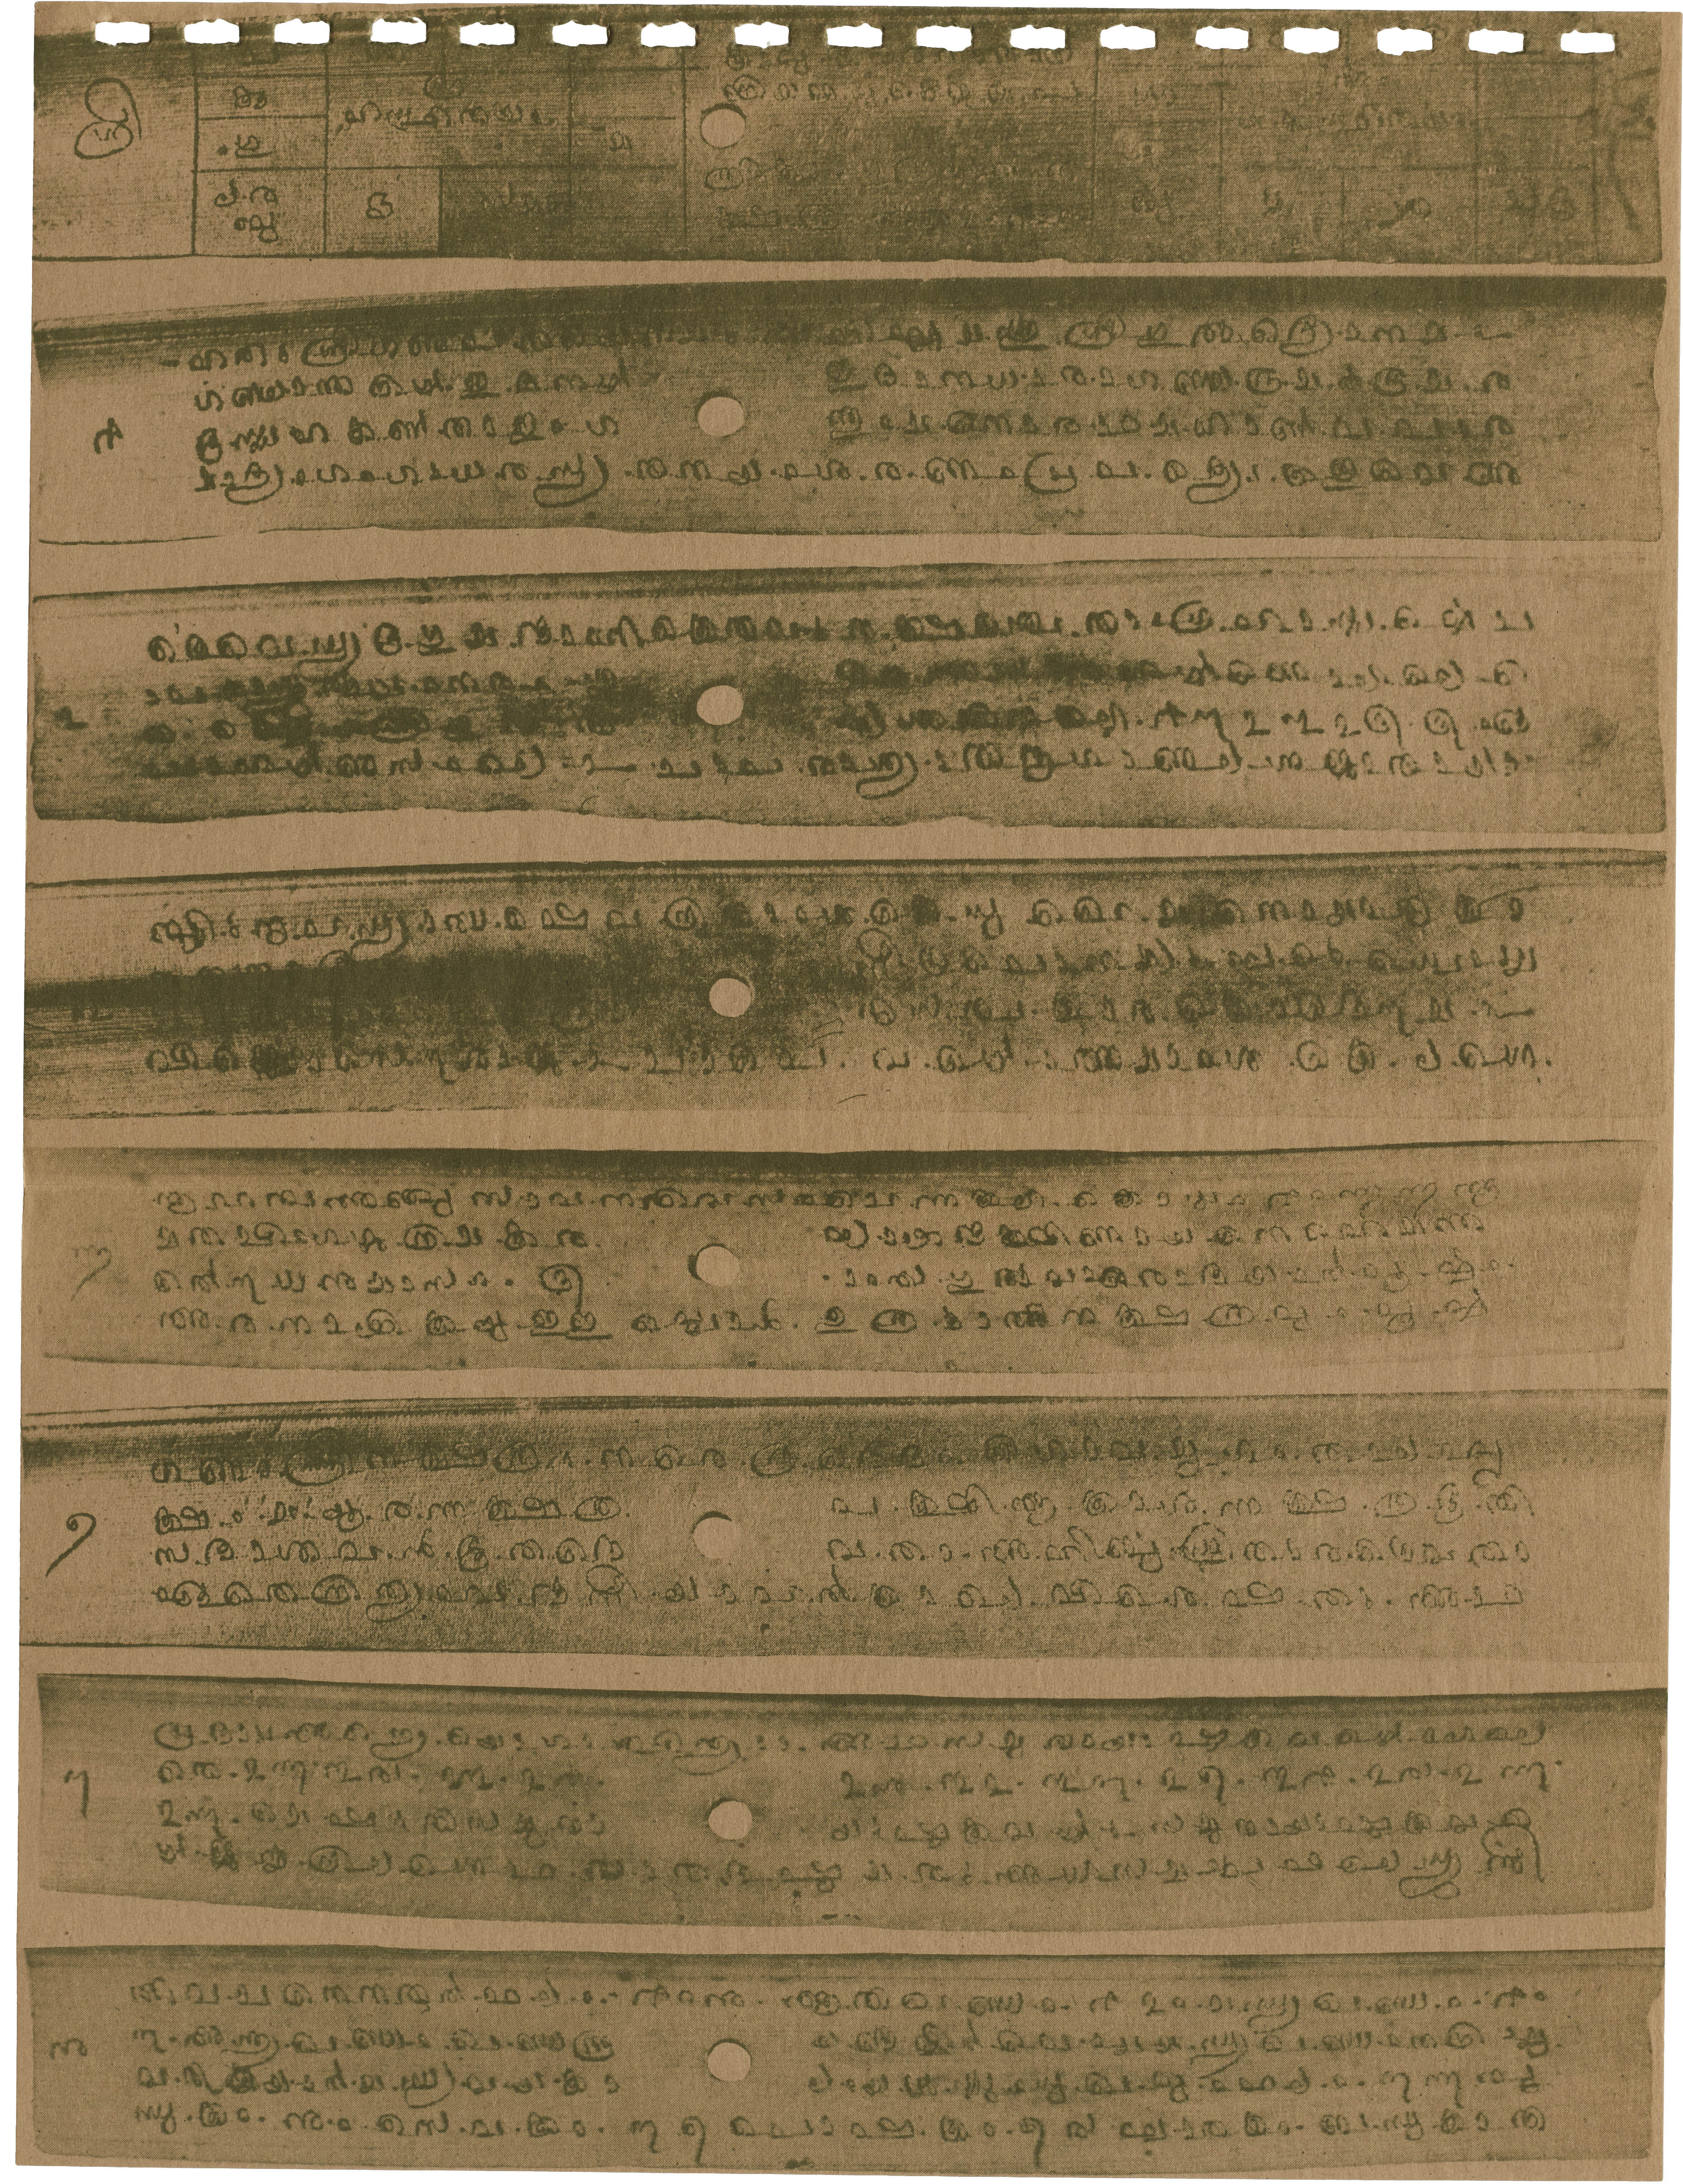 Medieval astrological manuscript in Malayalam, from the south-west coast of India. The rounded characters relate directly to the movement of the vertically held stylus on palm leaf.